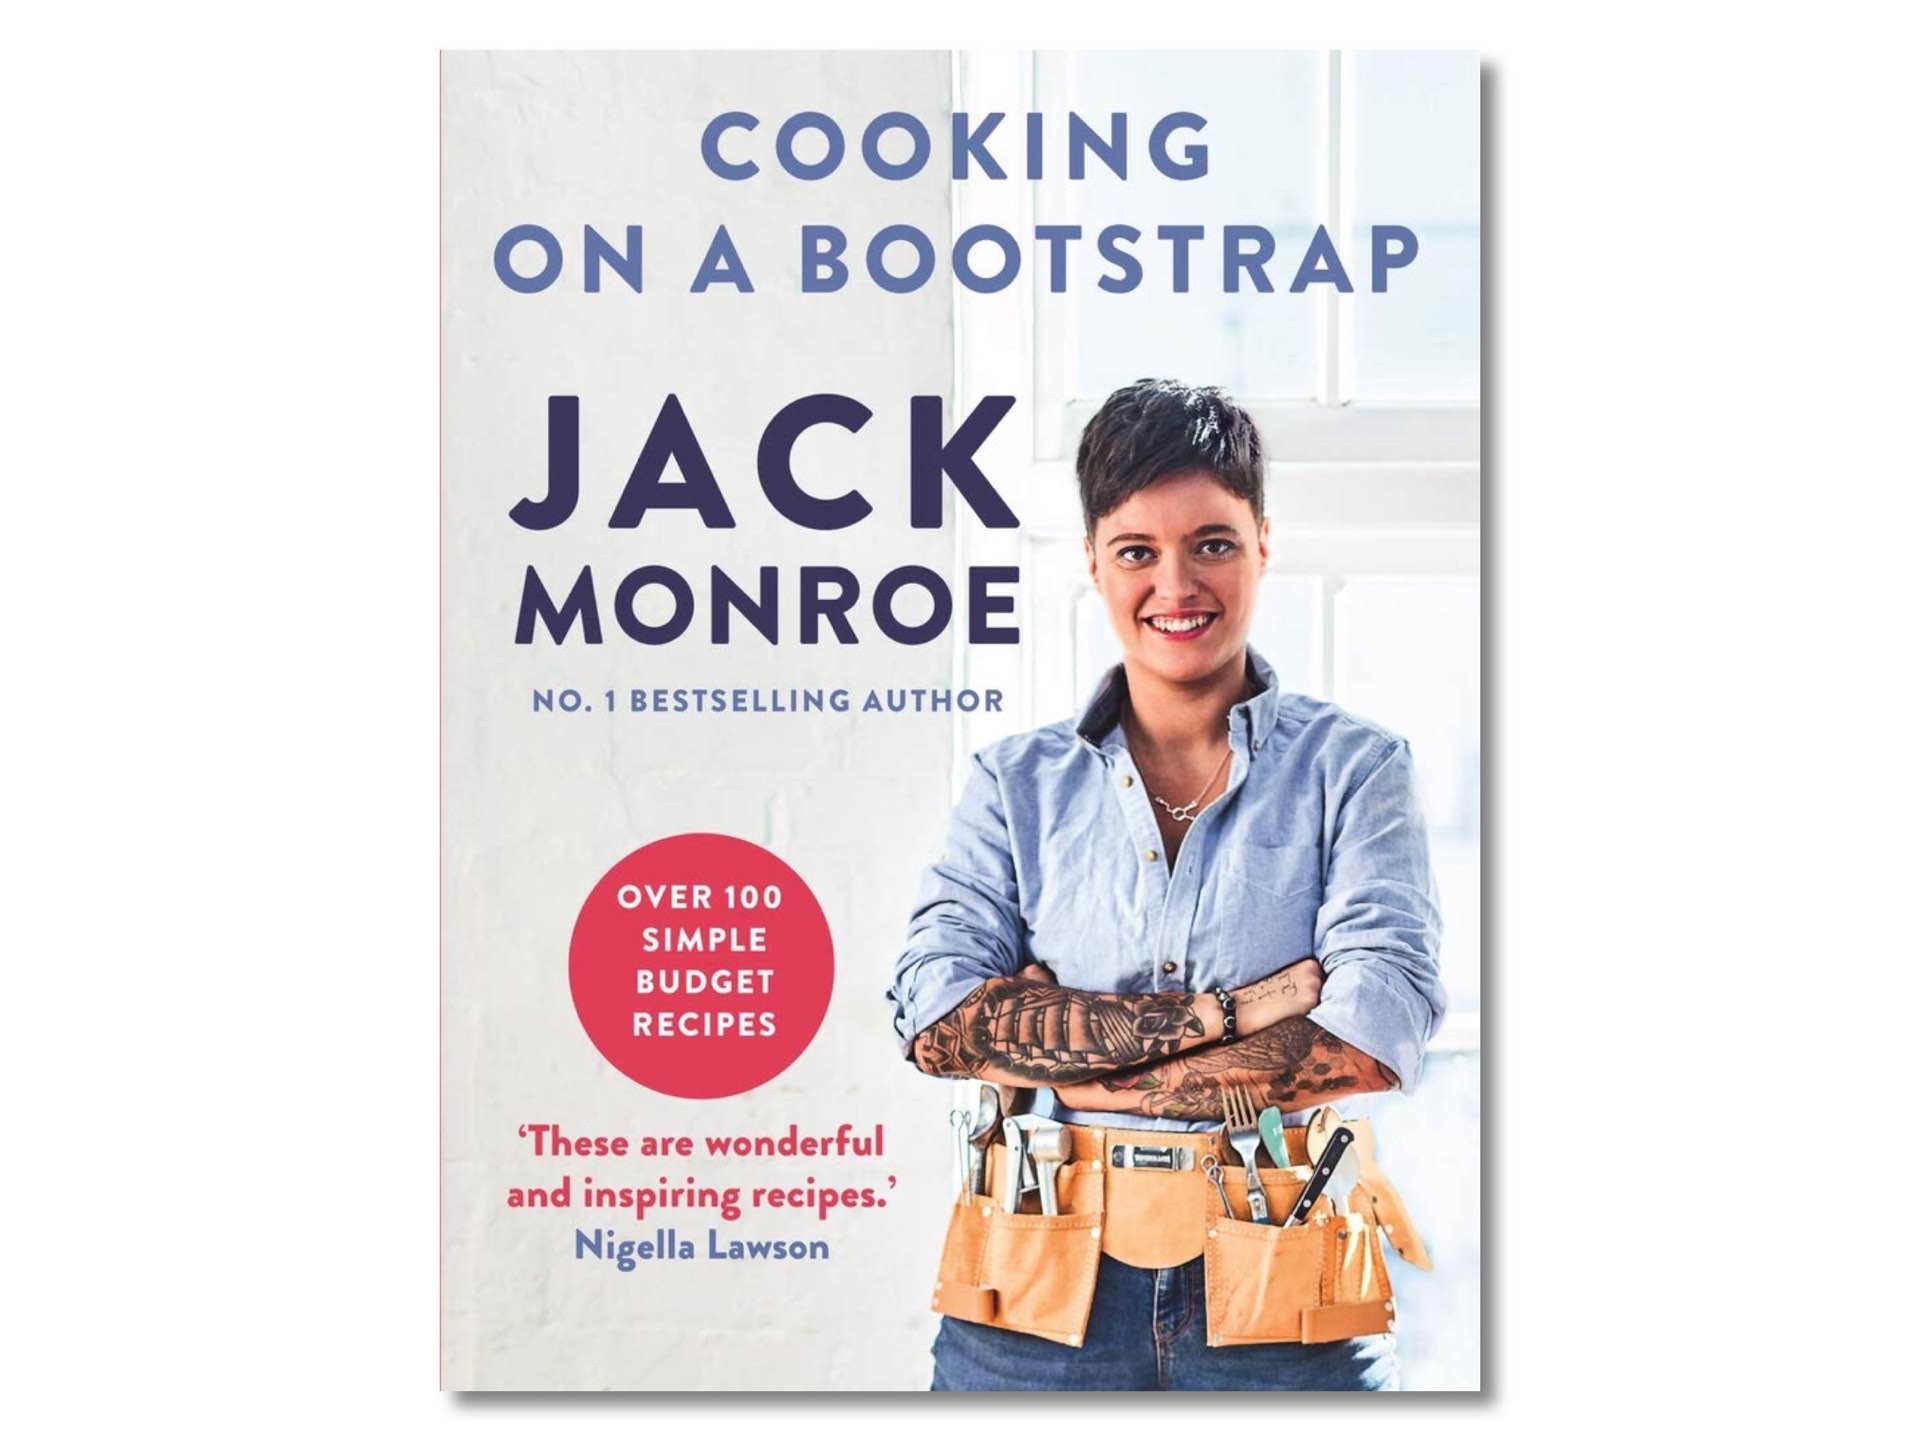 cooking-on-a-bootstrap-by-jack-monroe